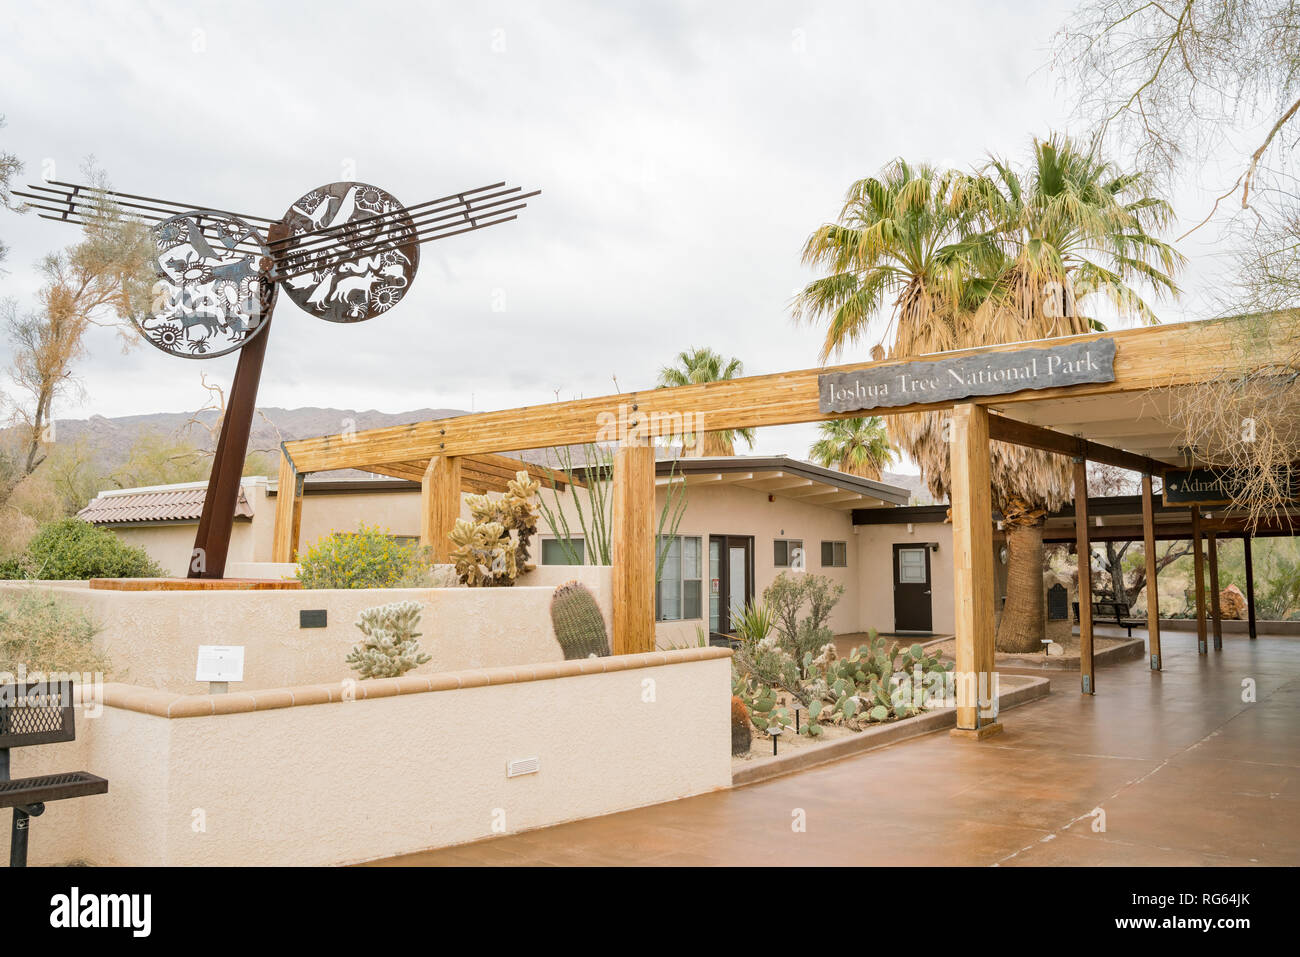 California, MAR 10: Exterior view of the Joshua Tree National Park Visitor Center on MAR 10, 2018 at California, United States Stock Photo